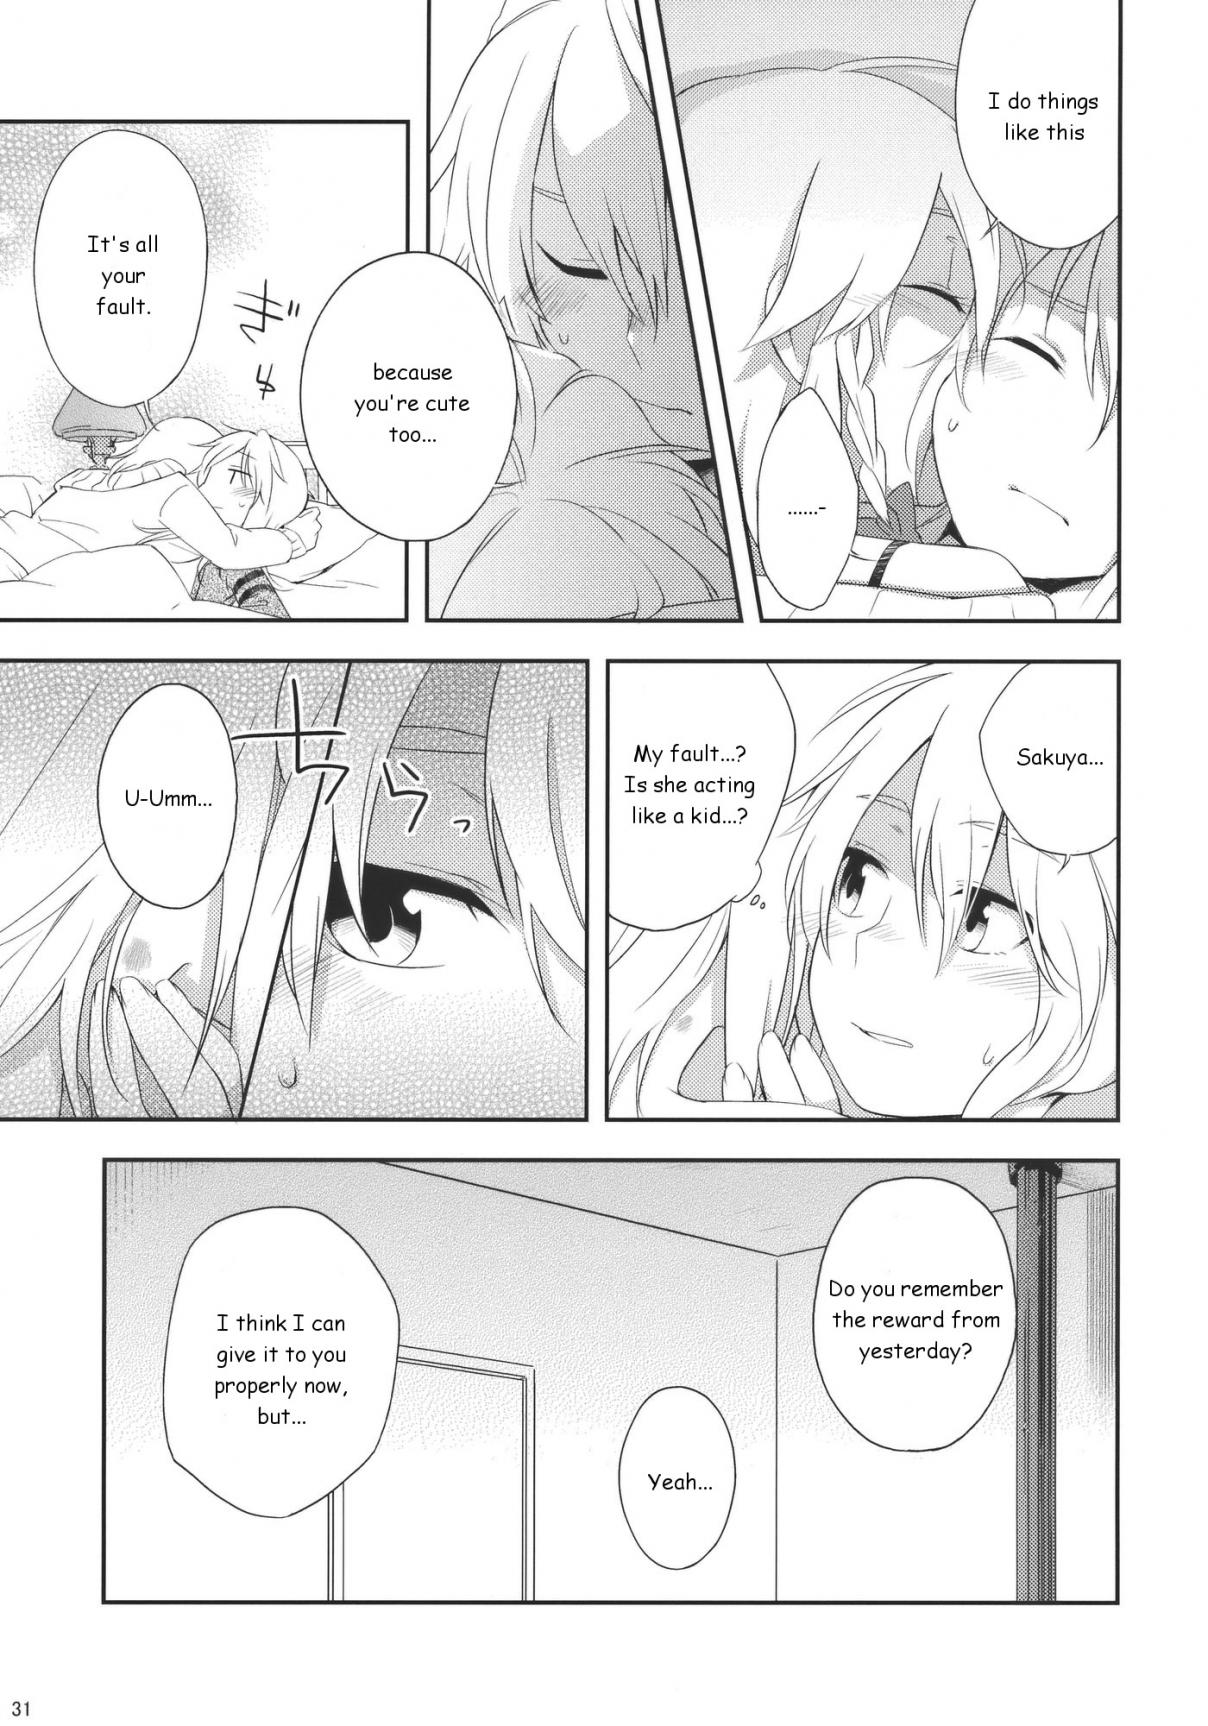 Touhou How to hold hands Oneshot